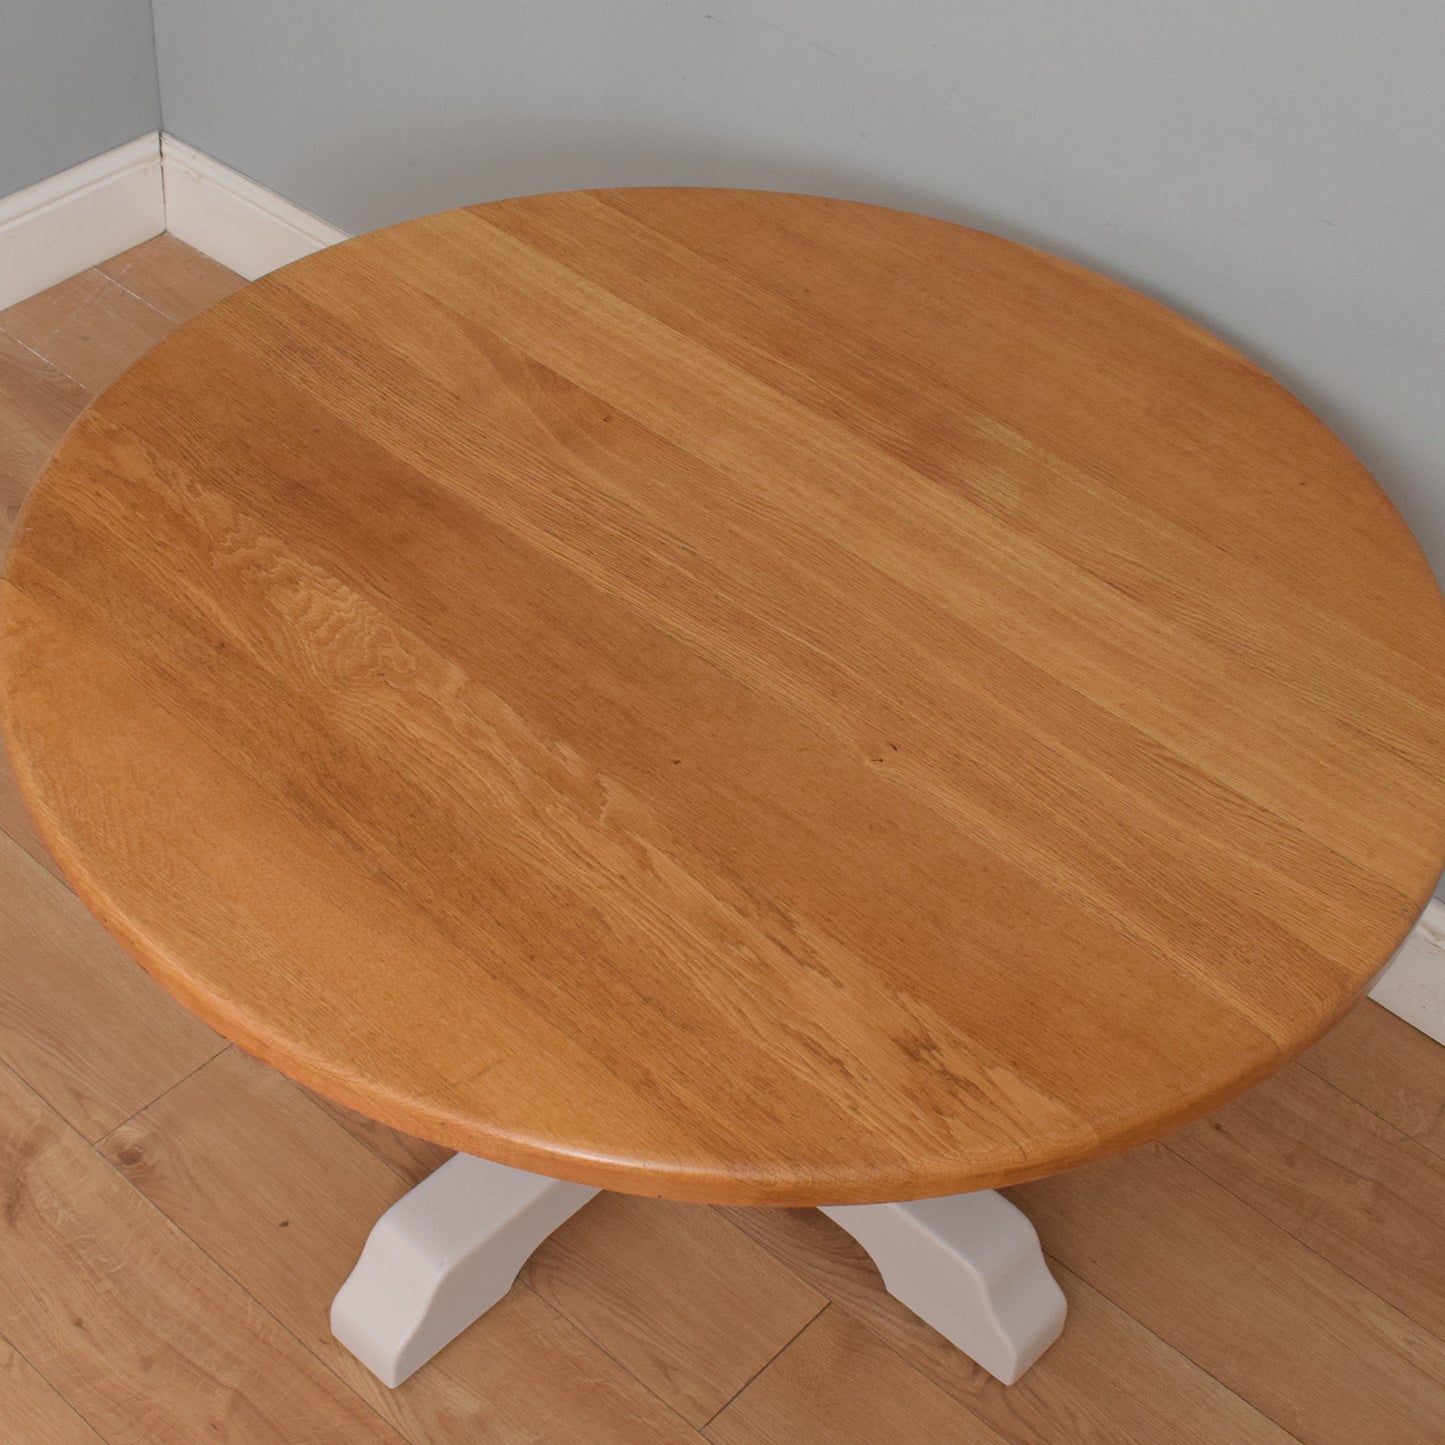 Round Oak Dining Table and Four Chairs